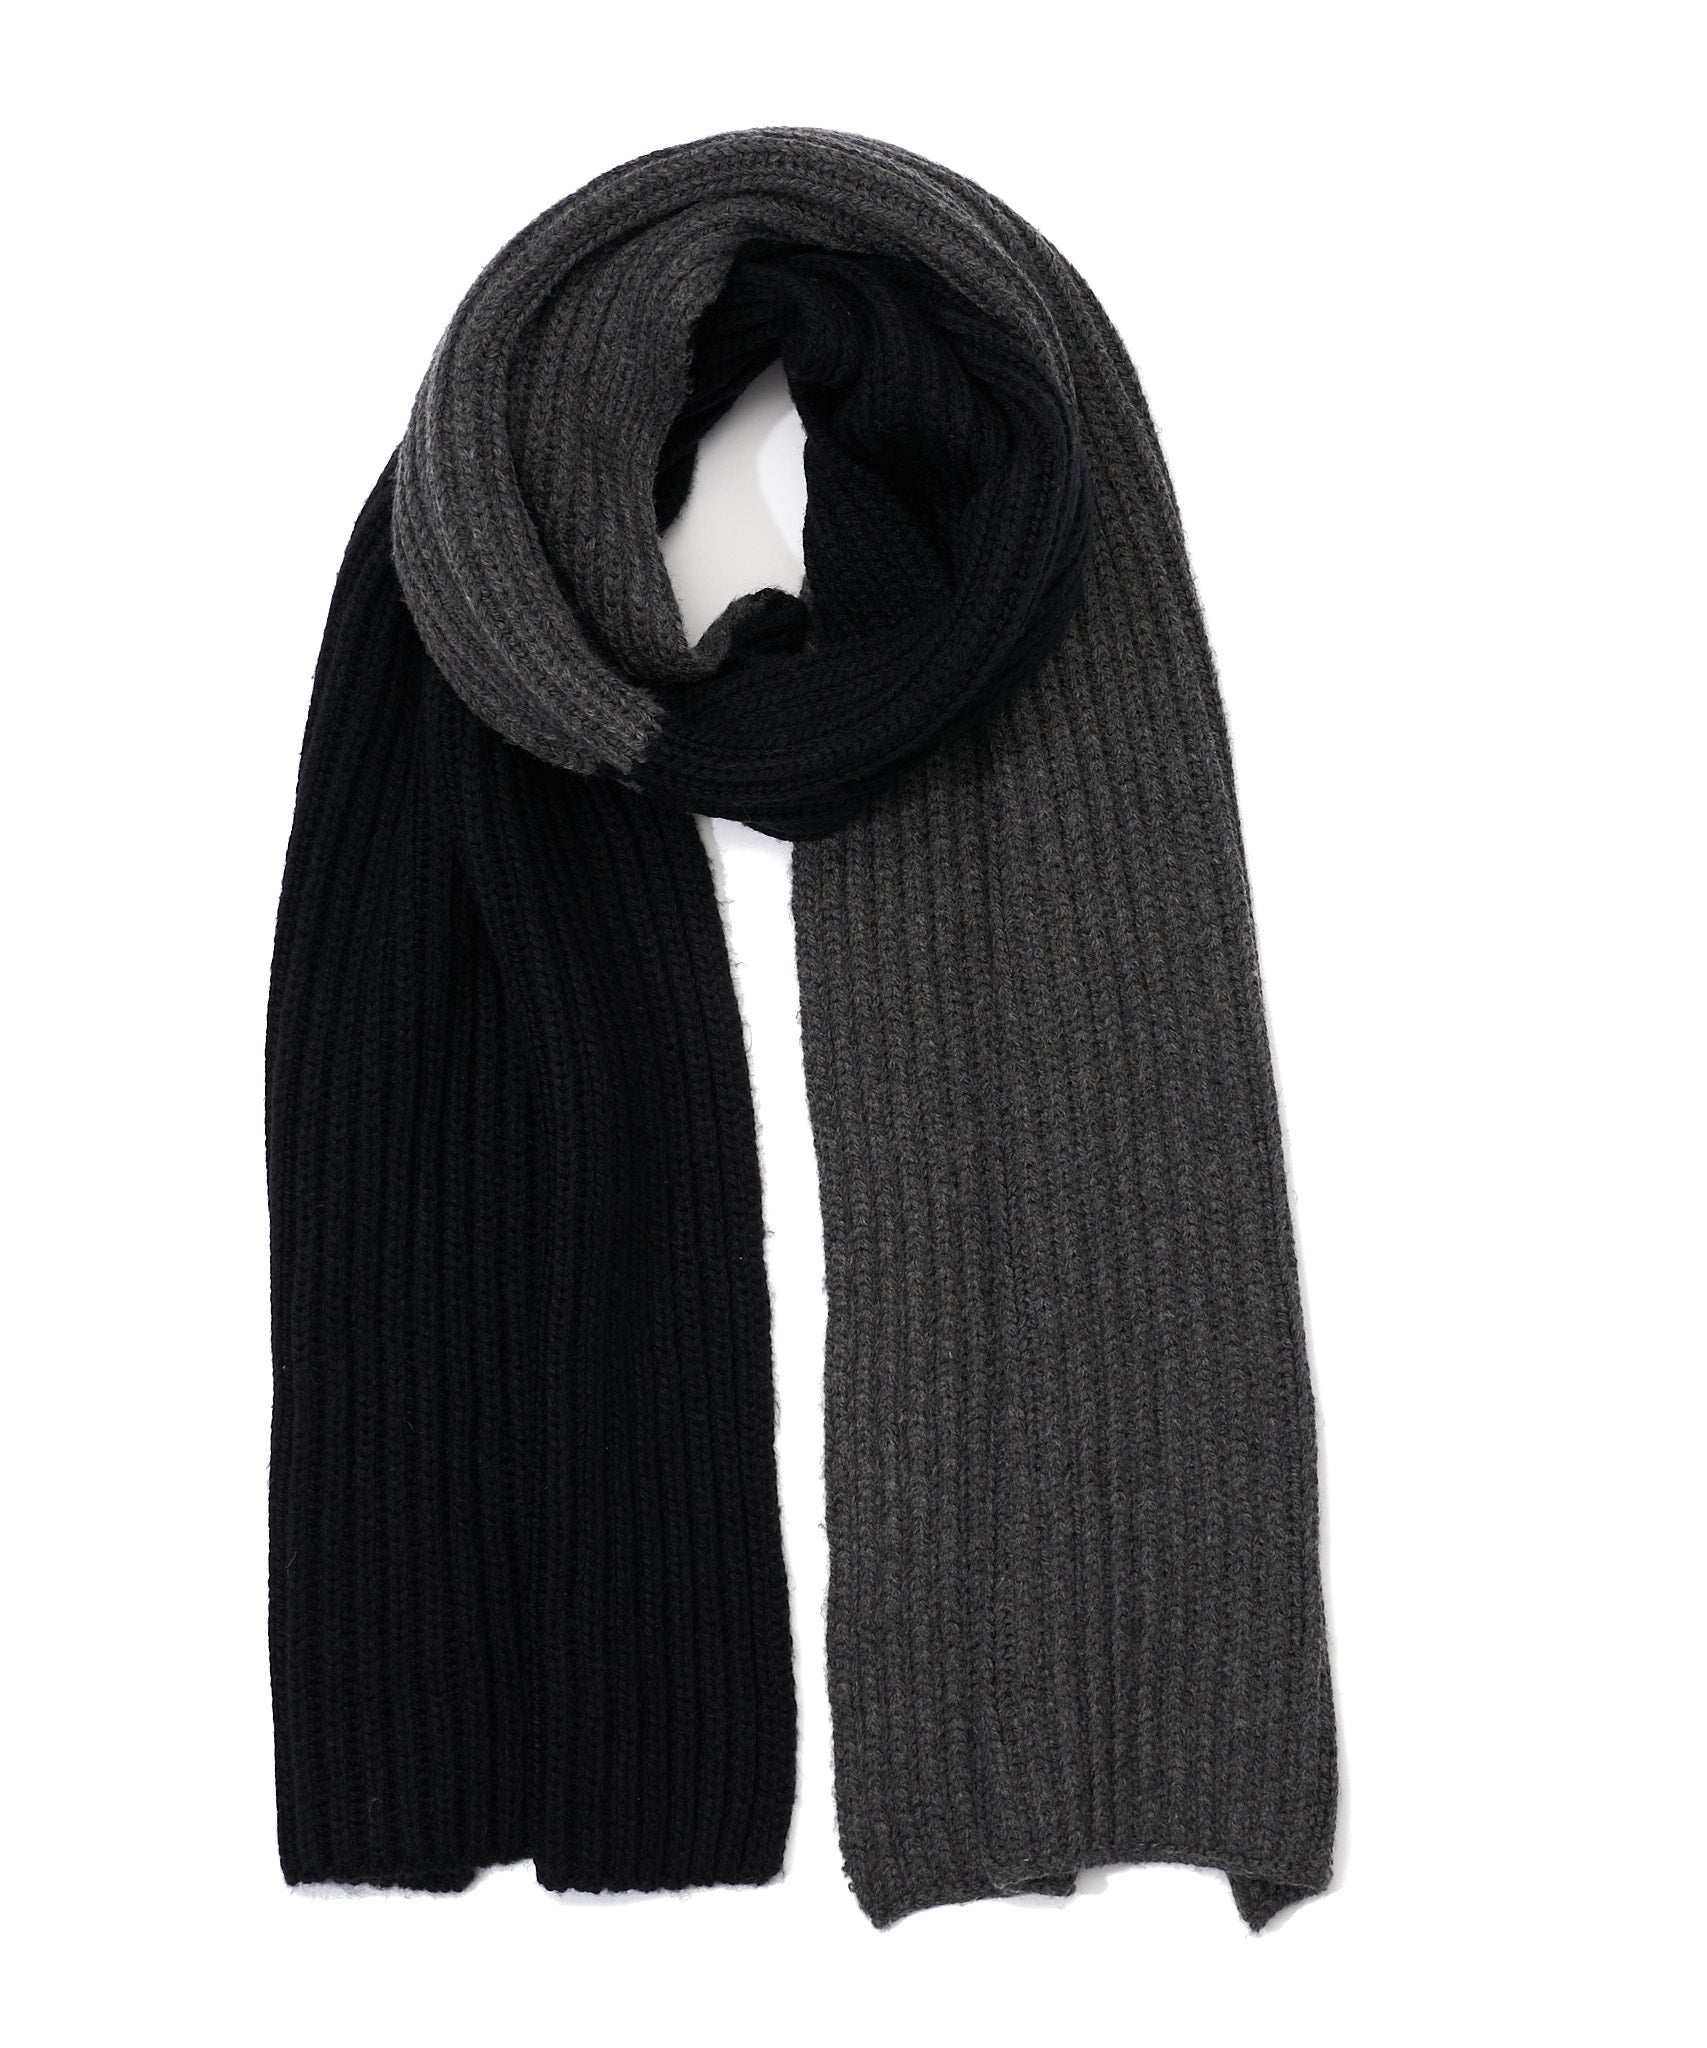 Colorbblock Rib Scarf in color Black/Charcoal